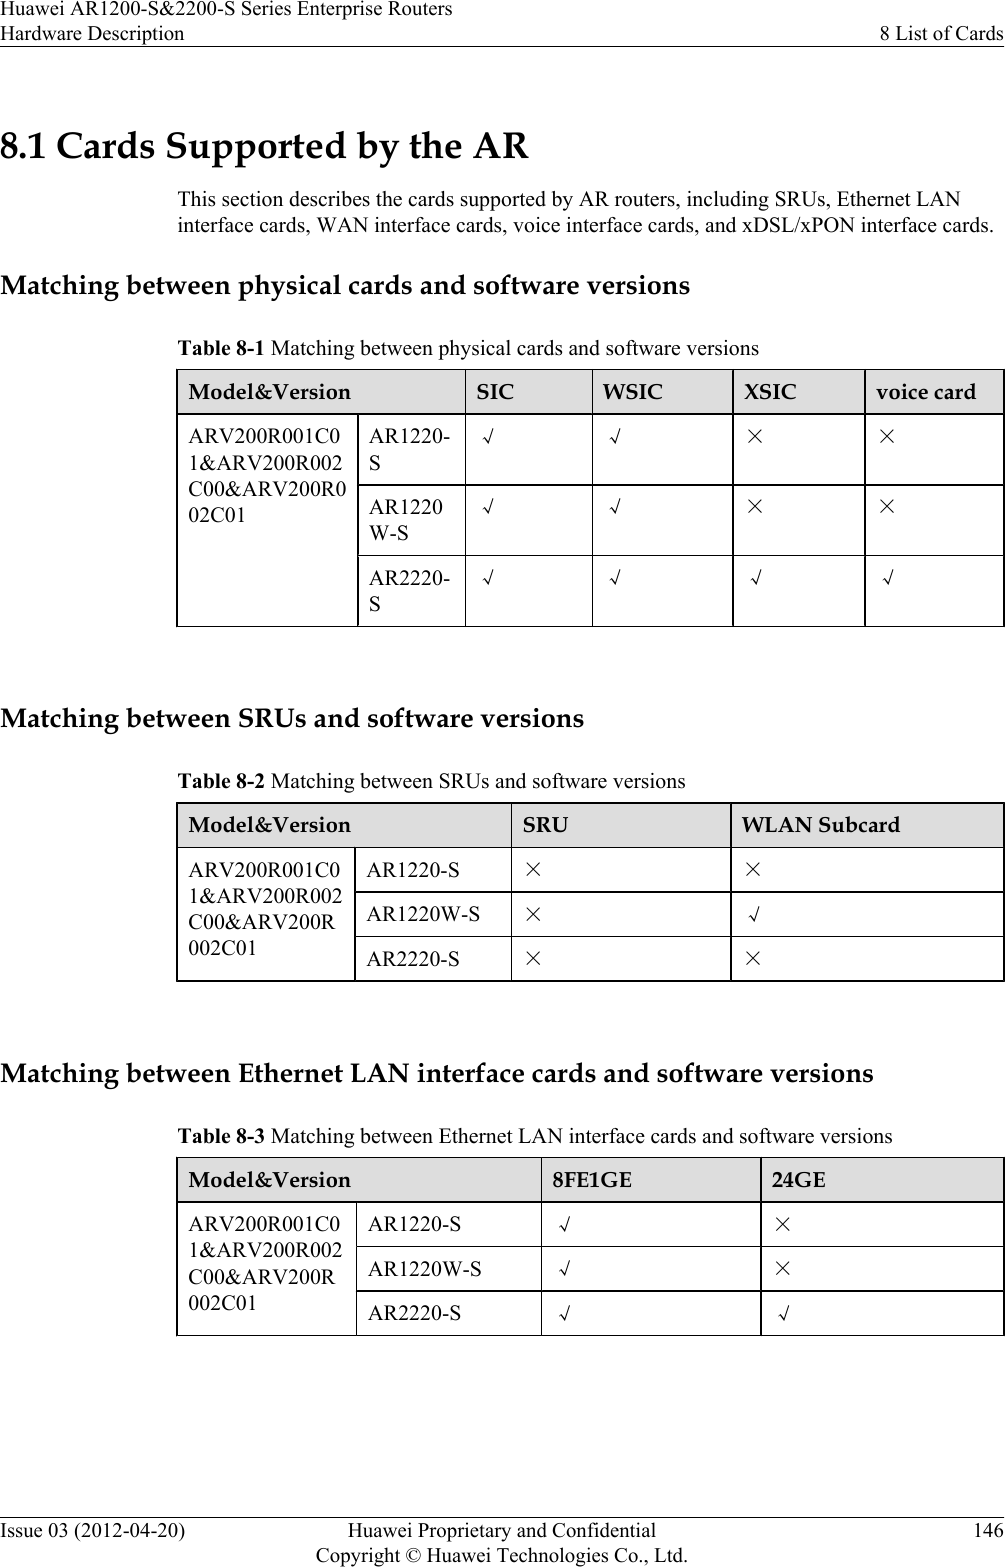 8.1 Cards Supported by the ARThis section describes the cards supported by AR routers, including SRUs, Ethernet LANinterface cards, WAN interface cards, voice interface cards, and xDSL/xPON interface cards.Matching between physical cards and software versionsTable 8-1 Matching between physical cards and software versionsModel&amp;Version SIC WSIC XSIC voice cardARV200R001C01&amp;ARV200R002C00&amp;ARV200R002C01AR1220-S√ √ × ×AR1220W-S√ √ × ×AR2220-S√ √ √ √ Matching between SRUs and software versionsTable 8-2 Matching between SRUs and software versionsModel&amp;Version SRU WLAN SubcardARV200R001C01&amp;ARV200R002C00&amp;ARV200R002C01AR1220-S × ×AR1220W-S × √AR2220-S × × Matching between Ethernet LAN interface cards and software versionsTable 8-3 Matching between Ethernet LAN interface cards and software versionsModel&amp;Version 8FE1GE 24GEARV200R001C01&amp;ARV200R002C00&amp;ARV200R002C01AR1220-S √ ×AR1220W-S √ ×AR2220-S √ √ Huawei AR1200-S&amp;2200-S Series Enterprise RoutersHardware Description 8 List of CardsIssue 03 (2012-04-20) Huawei Proprietary and ConfidentialCopyright © Huawei Technologies Co., Ltd.146